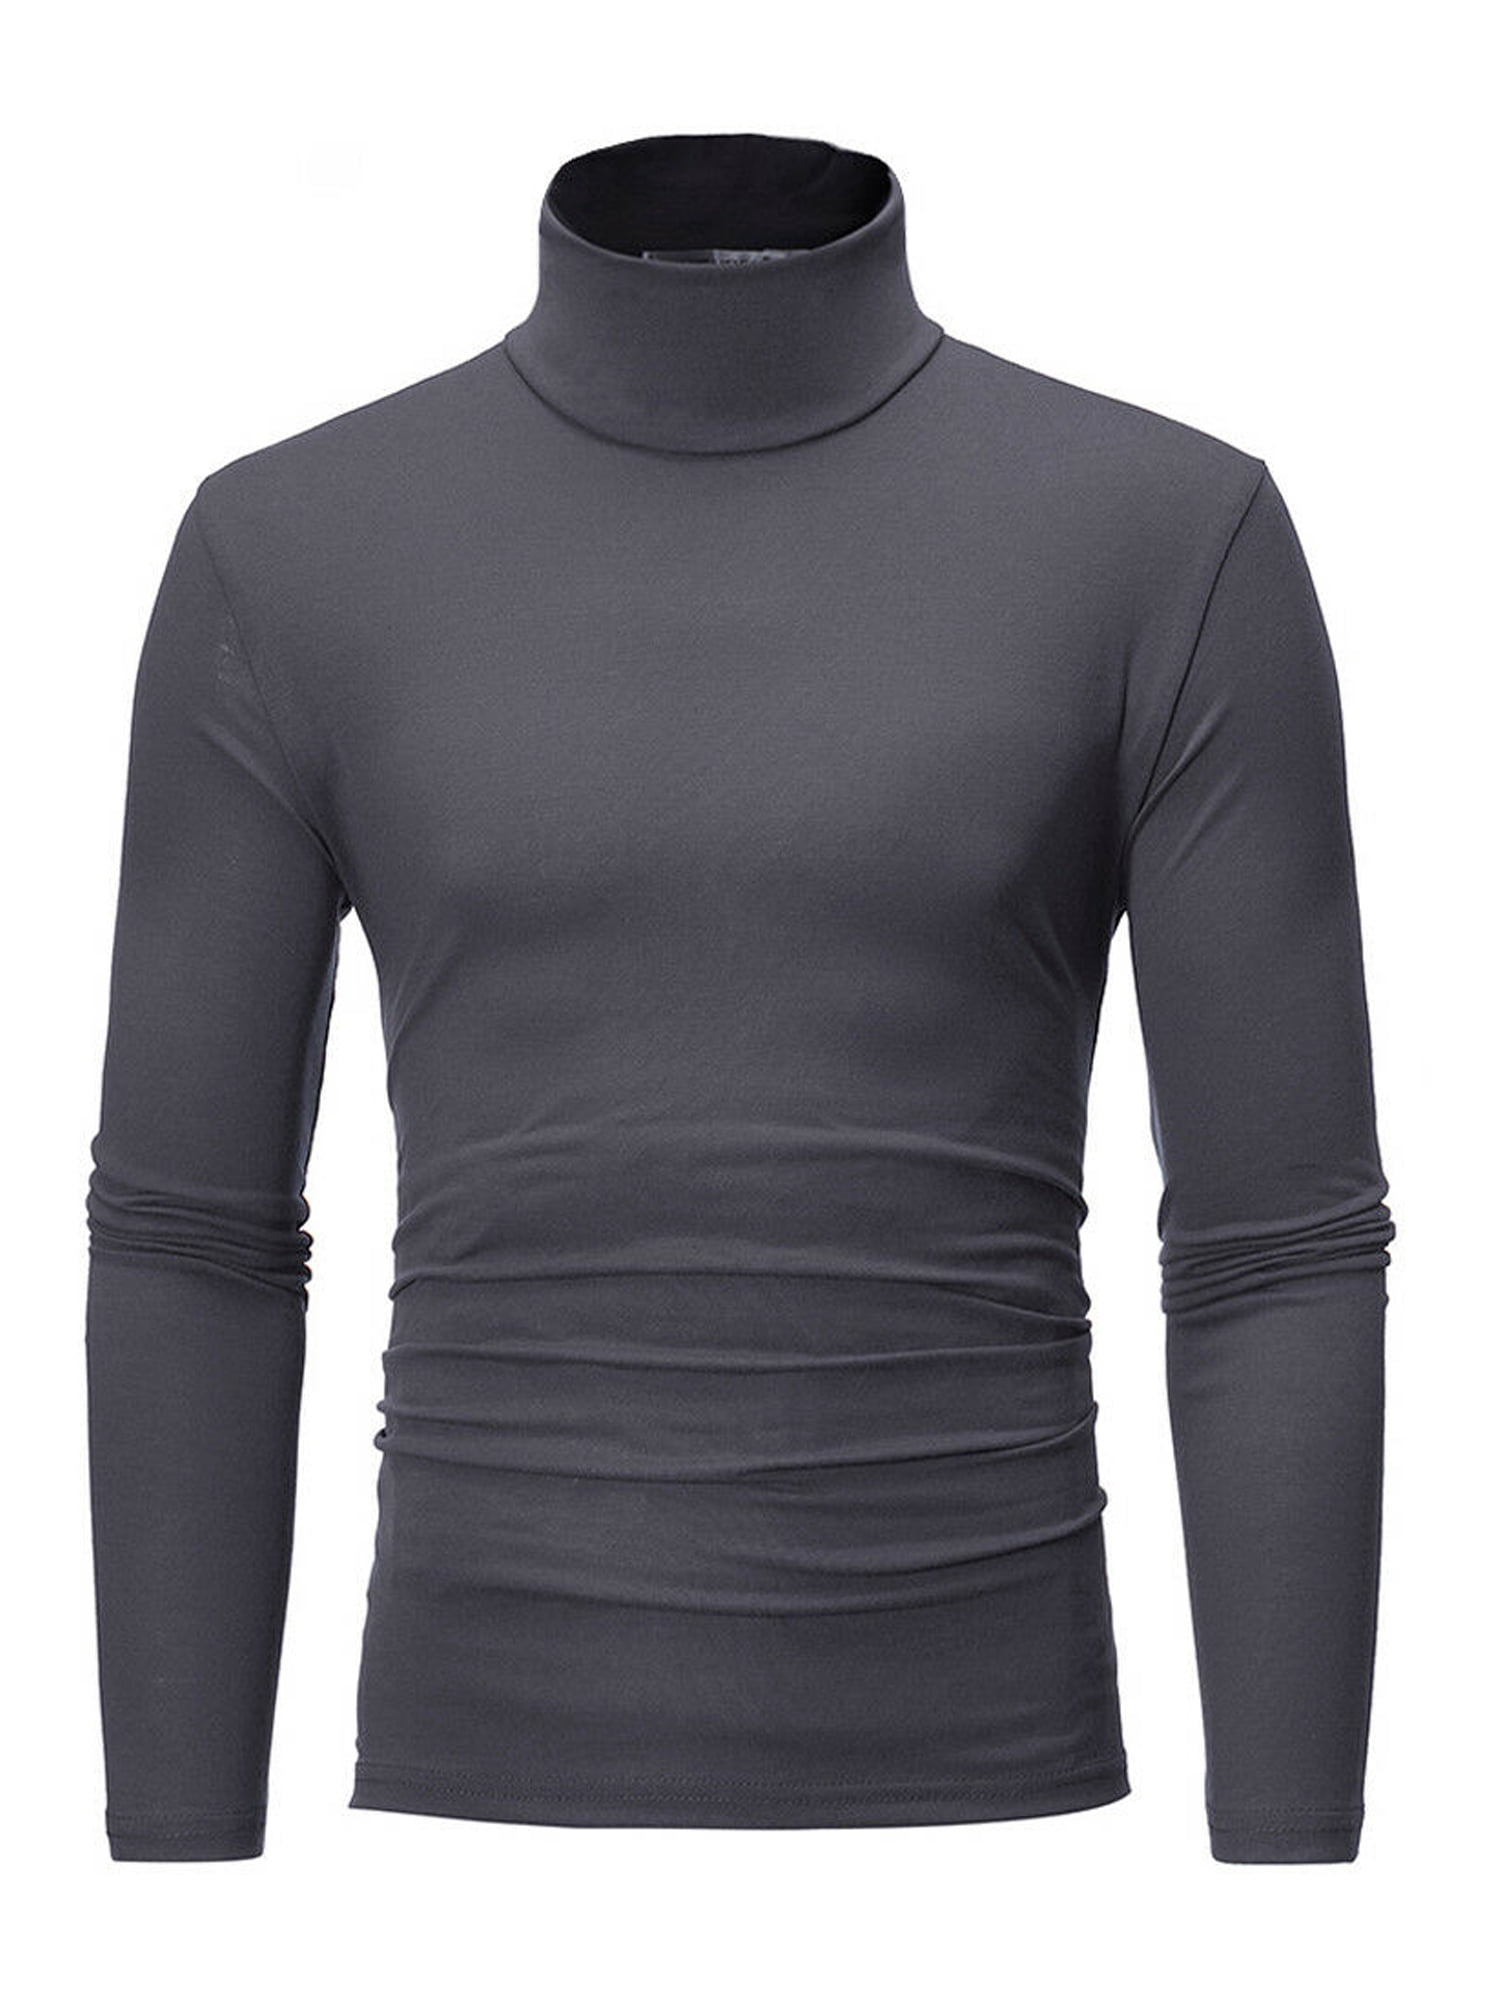 Mens Thermal Cotton Turtle Neck Skivvy Turtleneck Sweaters Tops Stretch ...